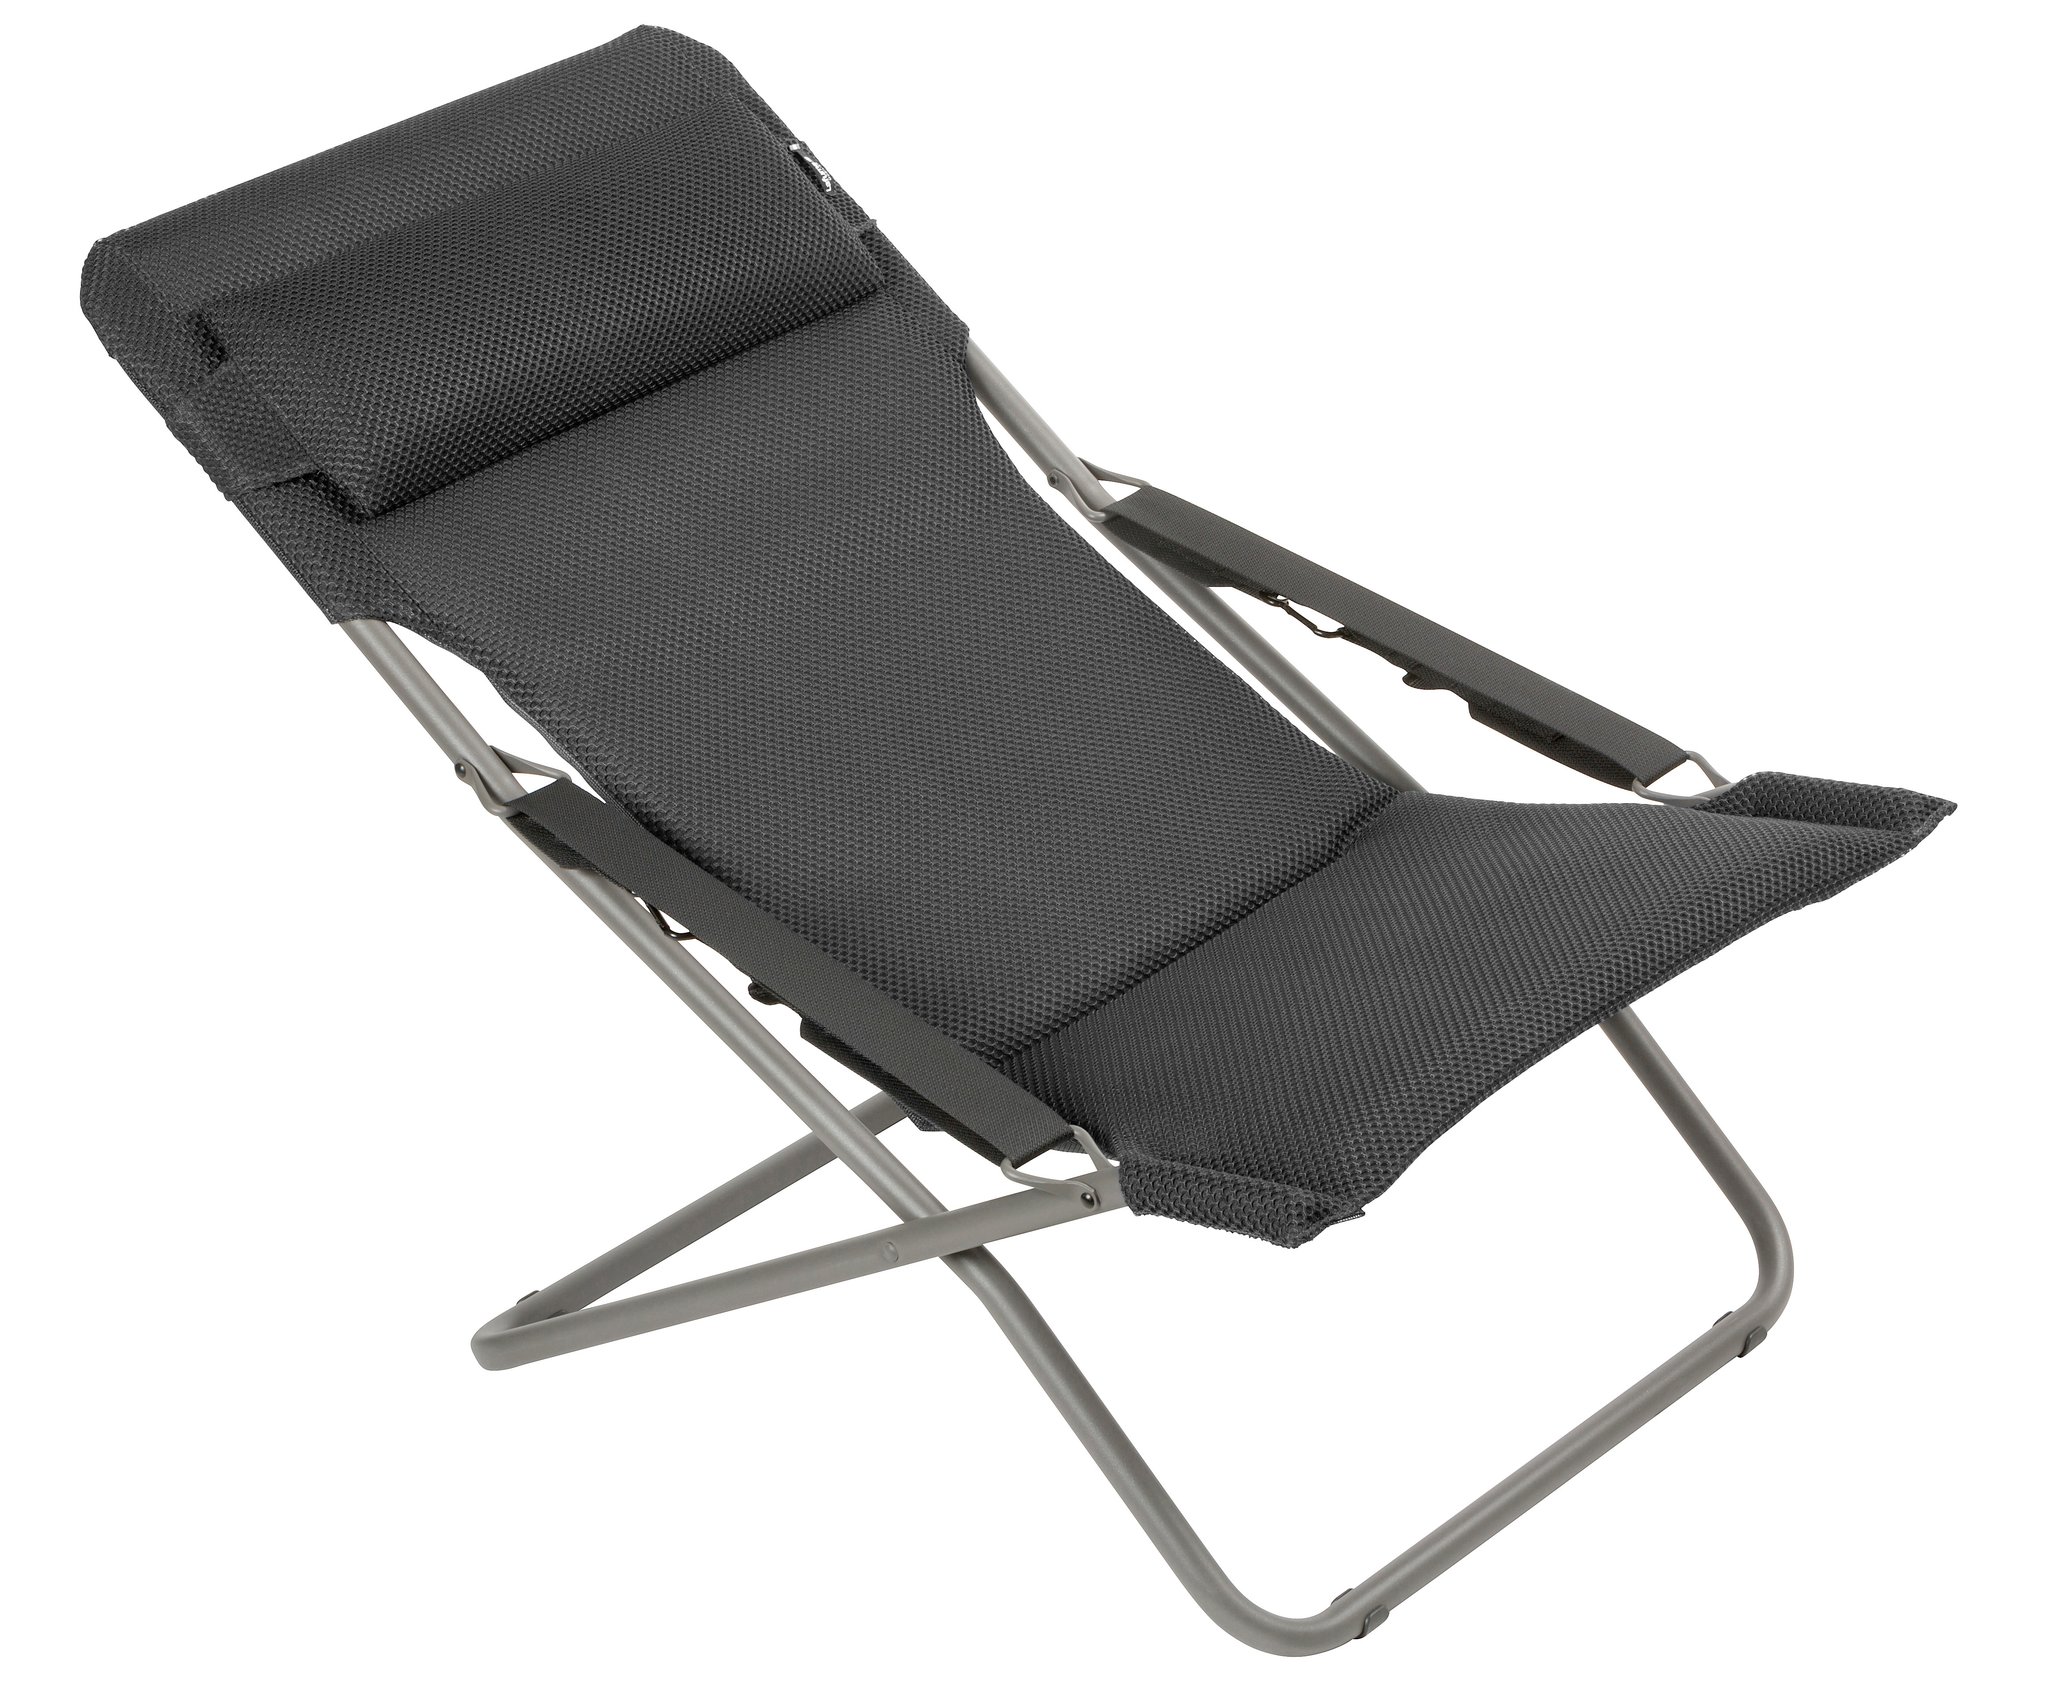 Revolutionise relaxation in the garden, on the patio or beside the pool with the Lafuma Transabed Deckchair equipped wit... » Outdoor Furniture Fuengirola, Costa Del Sol, Spain